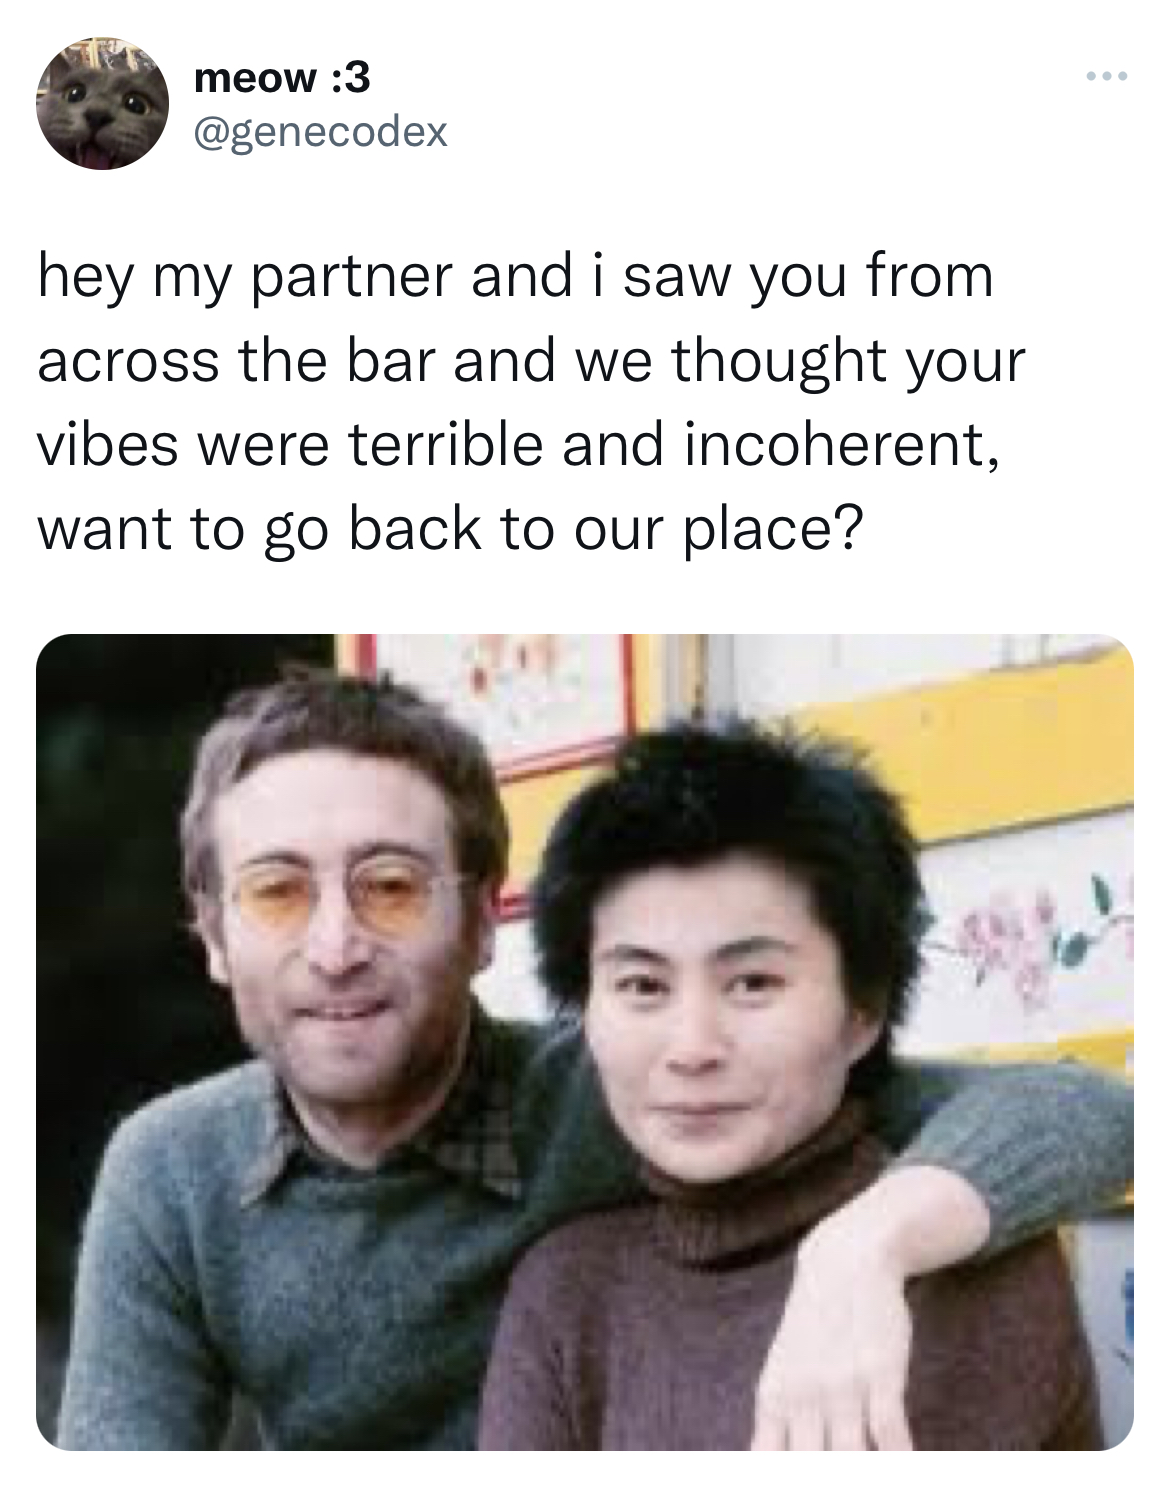 swinger memes across the bar - human behavior - meow 3 hey my partner and i aw you from across the bar and we thought your vibes were terrible and incoherent, want to go back to our place?